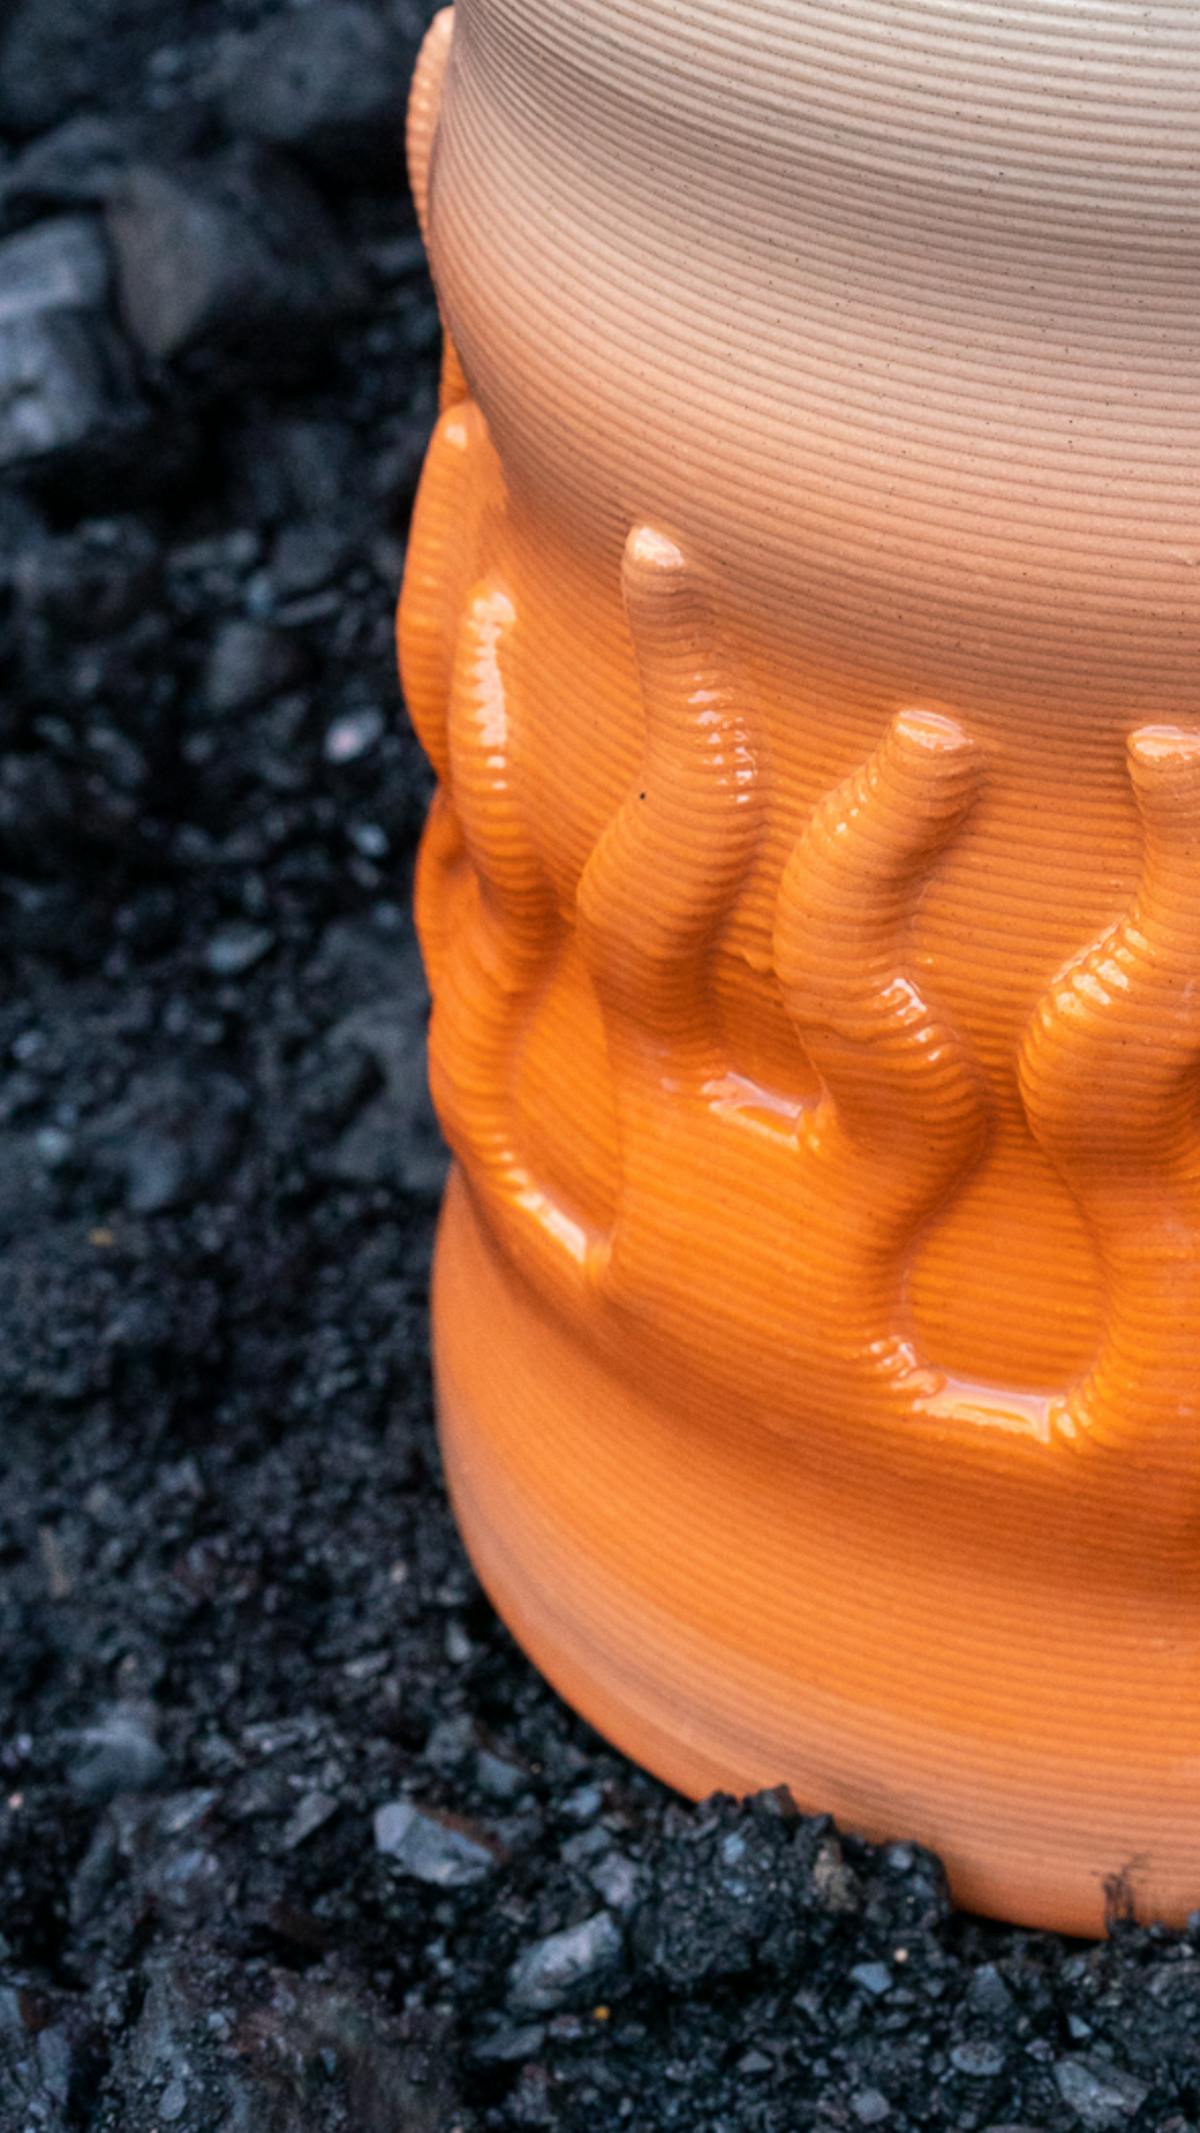 Detail view of 3d printed ceramic vase with flame relief